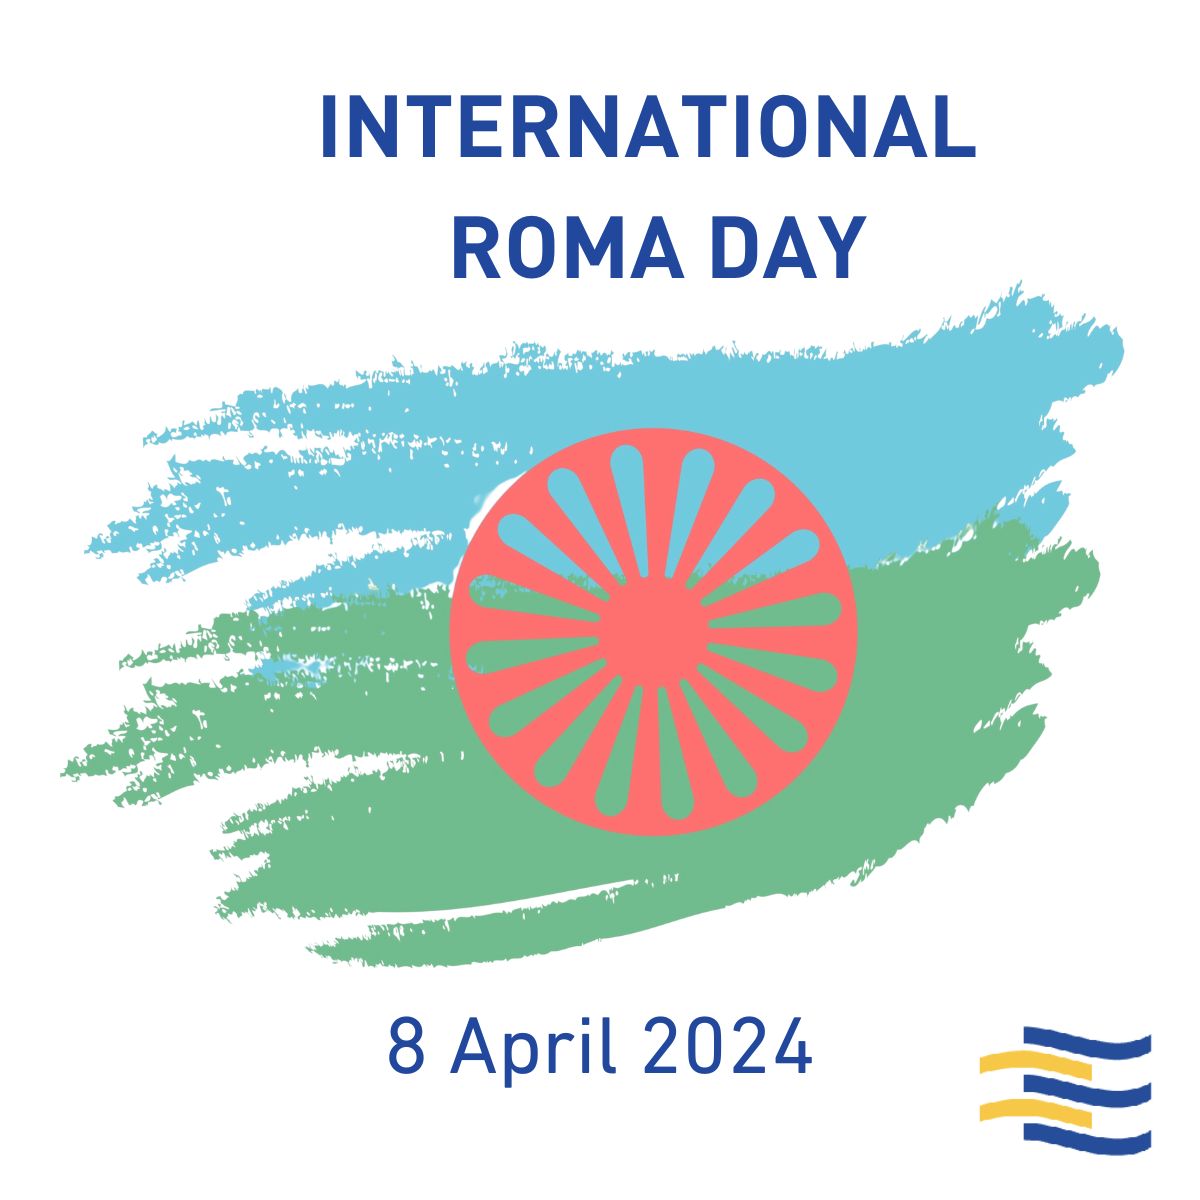 On #InternationalRomaDay we shed light on challenges faced by Roma worldwide. Equinet remains committed to ensuring that Roma & Travelers' voices are heard and their rights protected: 🔗Equinet Perspective: tinyurl.com/3hyyzxxf 🔗 Workshop: tinyurl.com/5dp2raa3